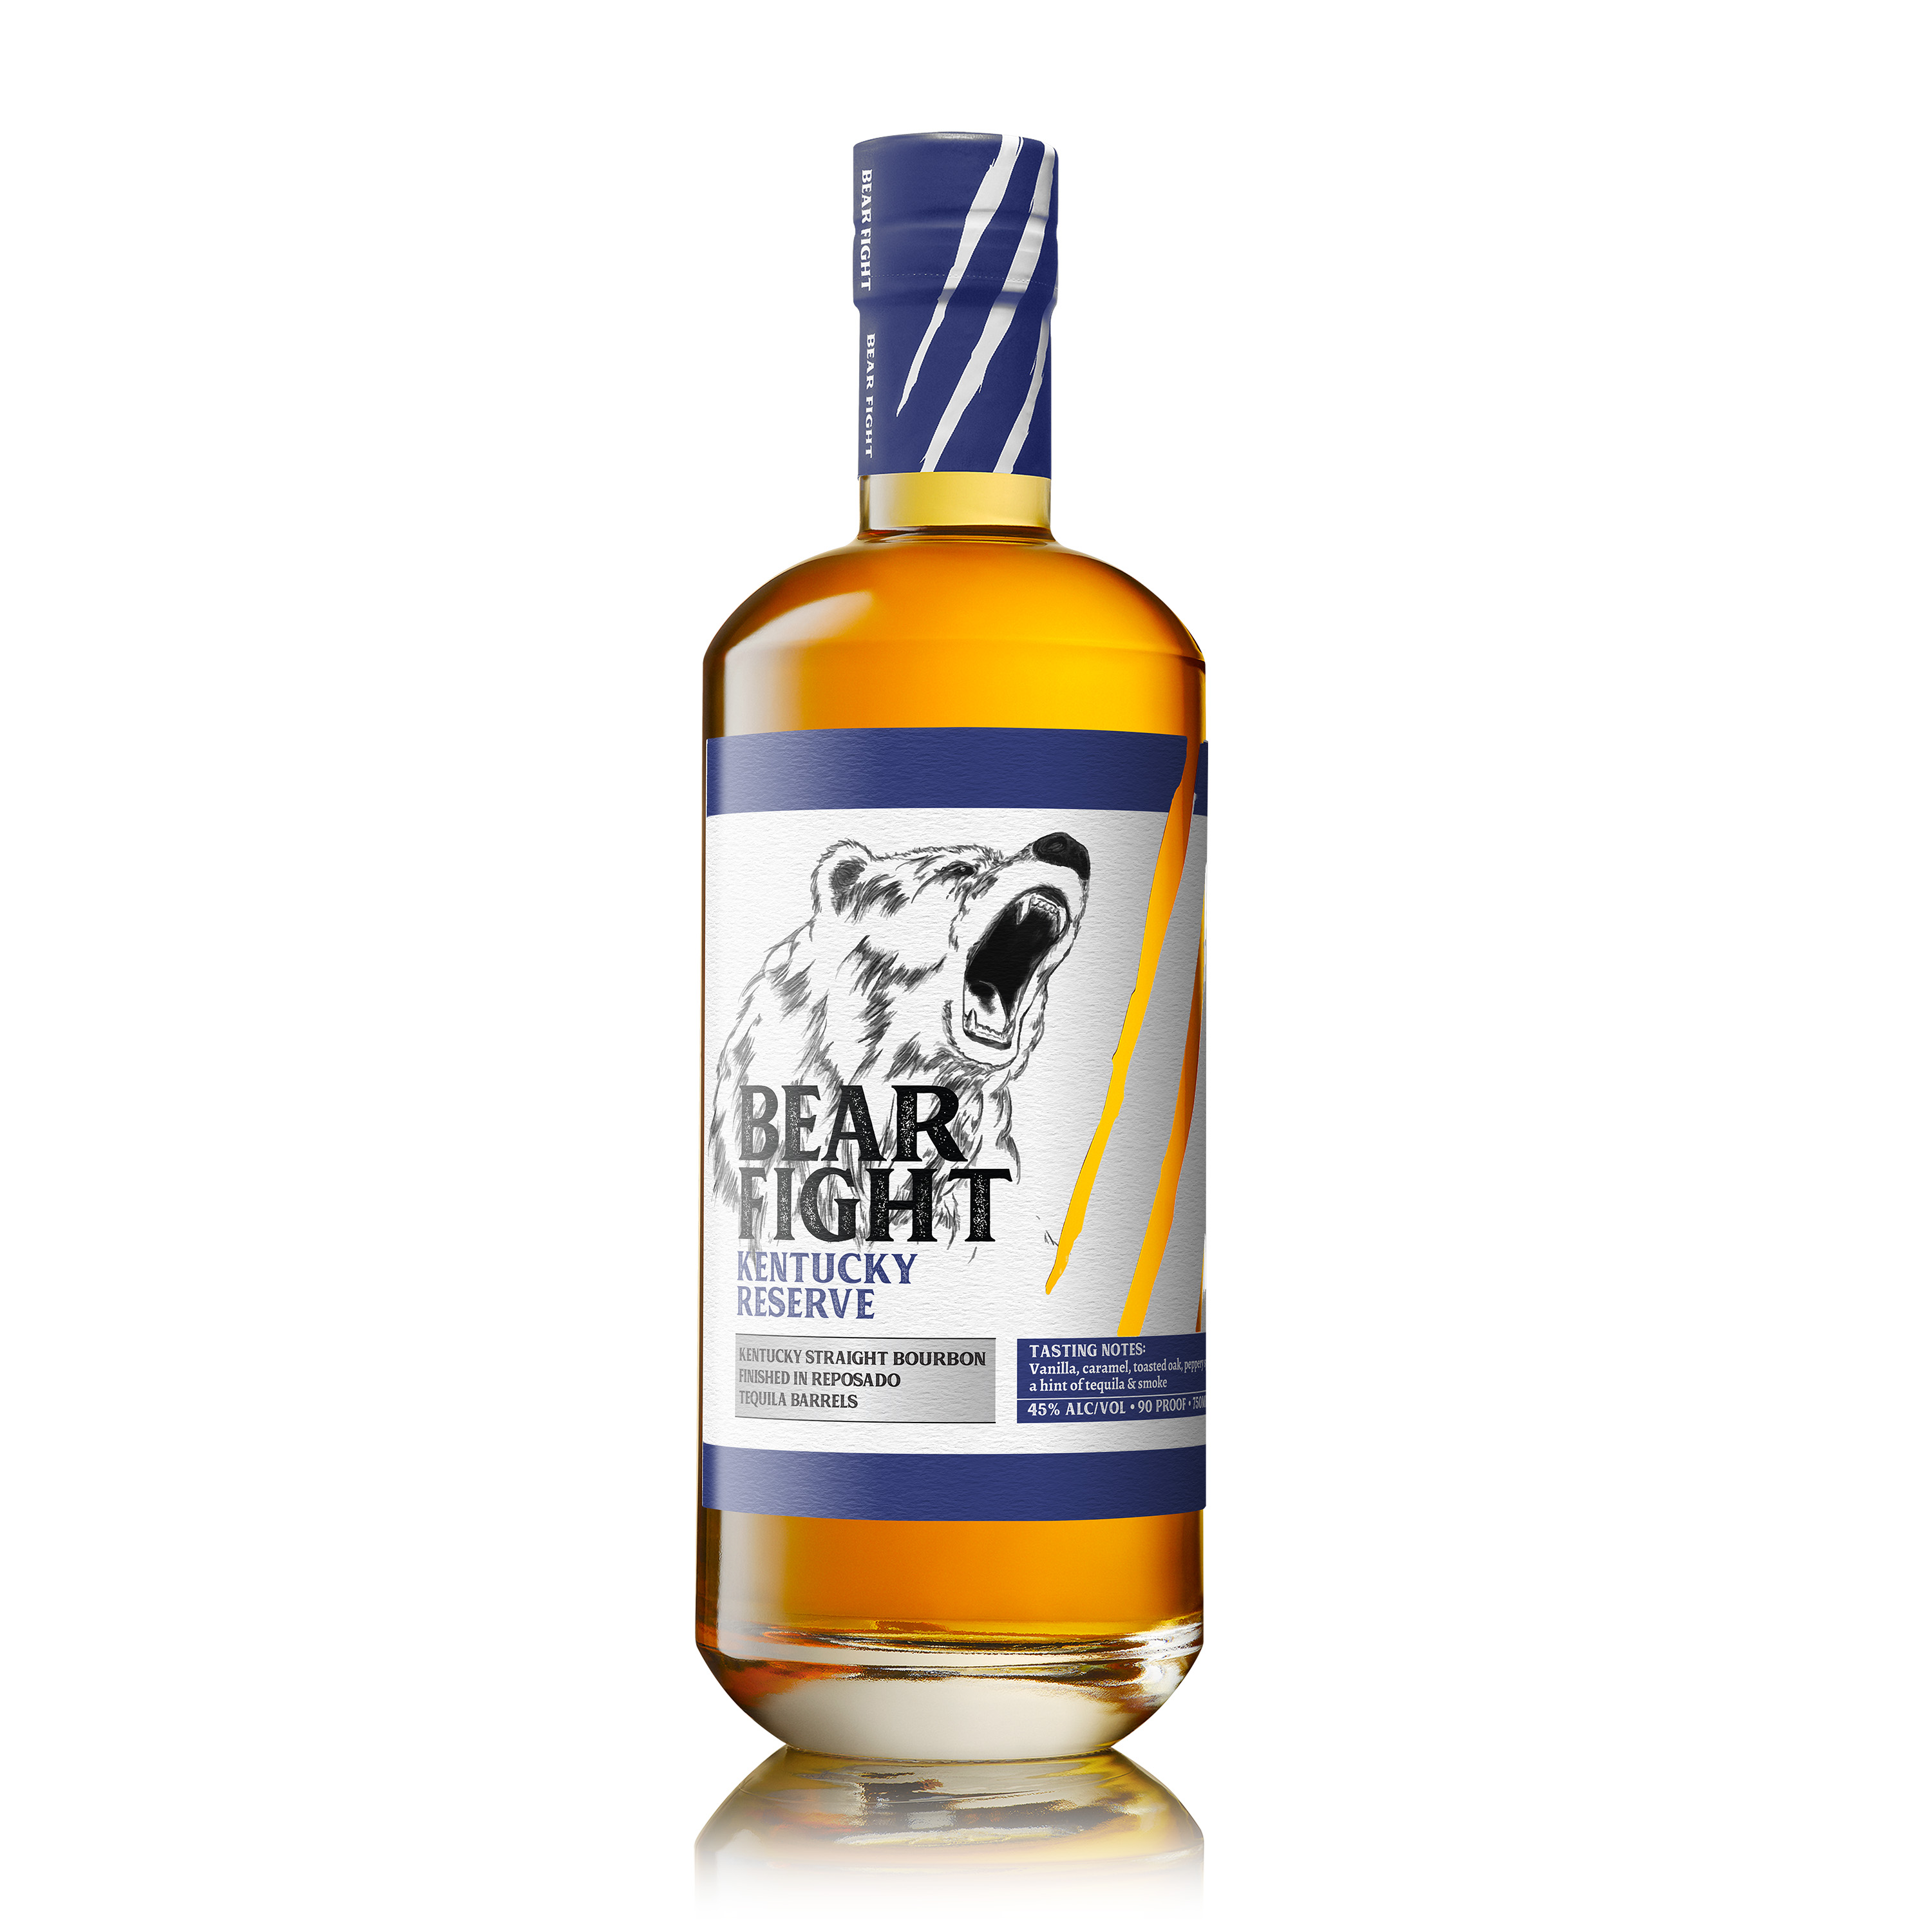 Bear Fight Kentucky Reserve a Unique Blend of Barrel and Flavor